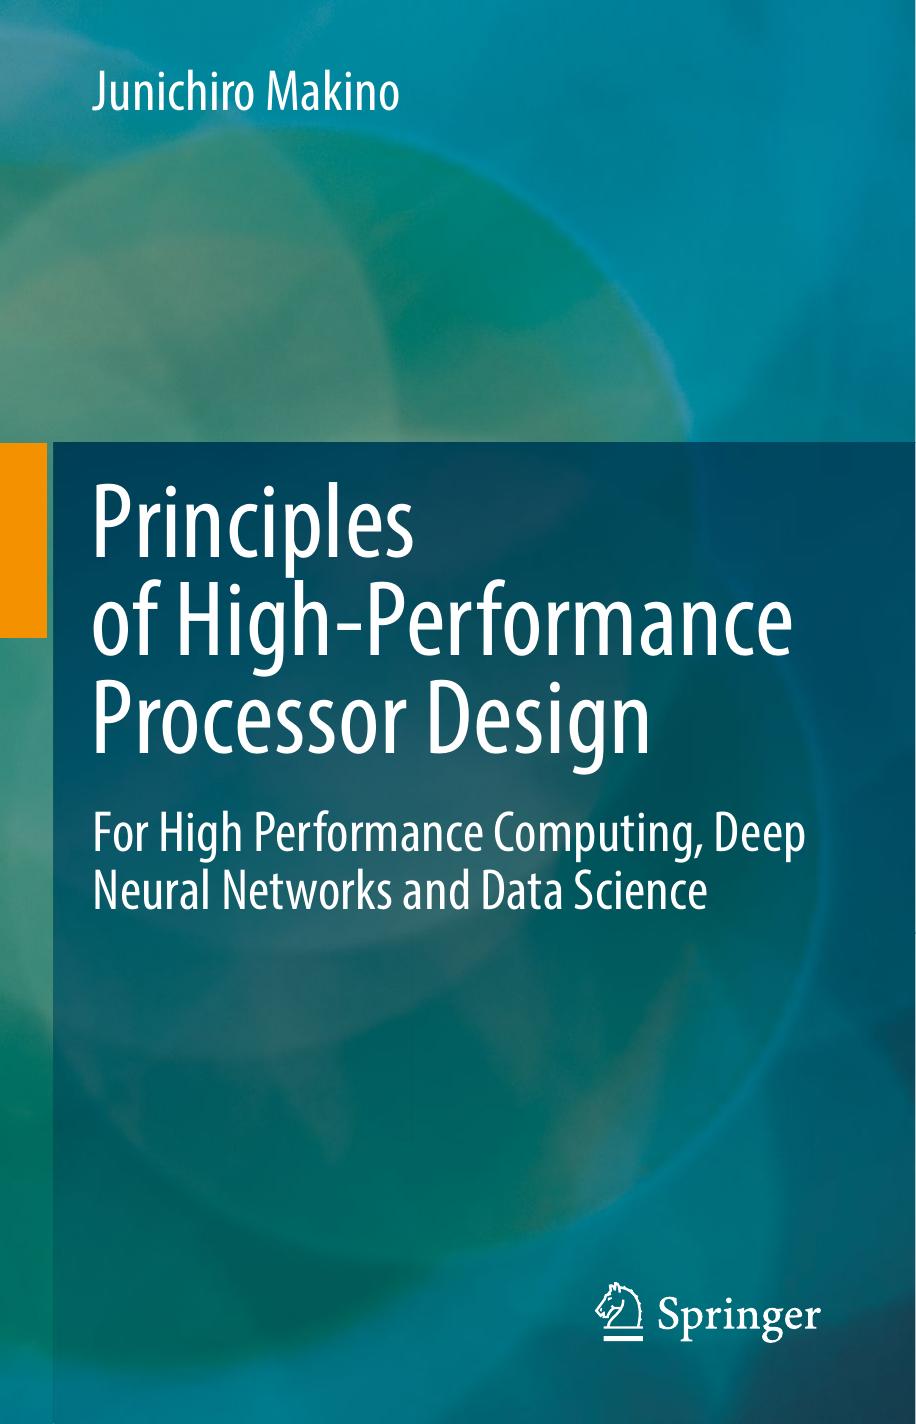 Principles of High-Performance Processor Design: For High Performance Computing, Deep Neural Networks and Data Science